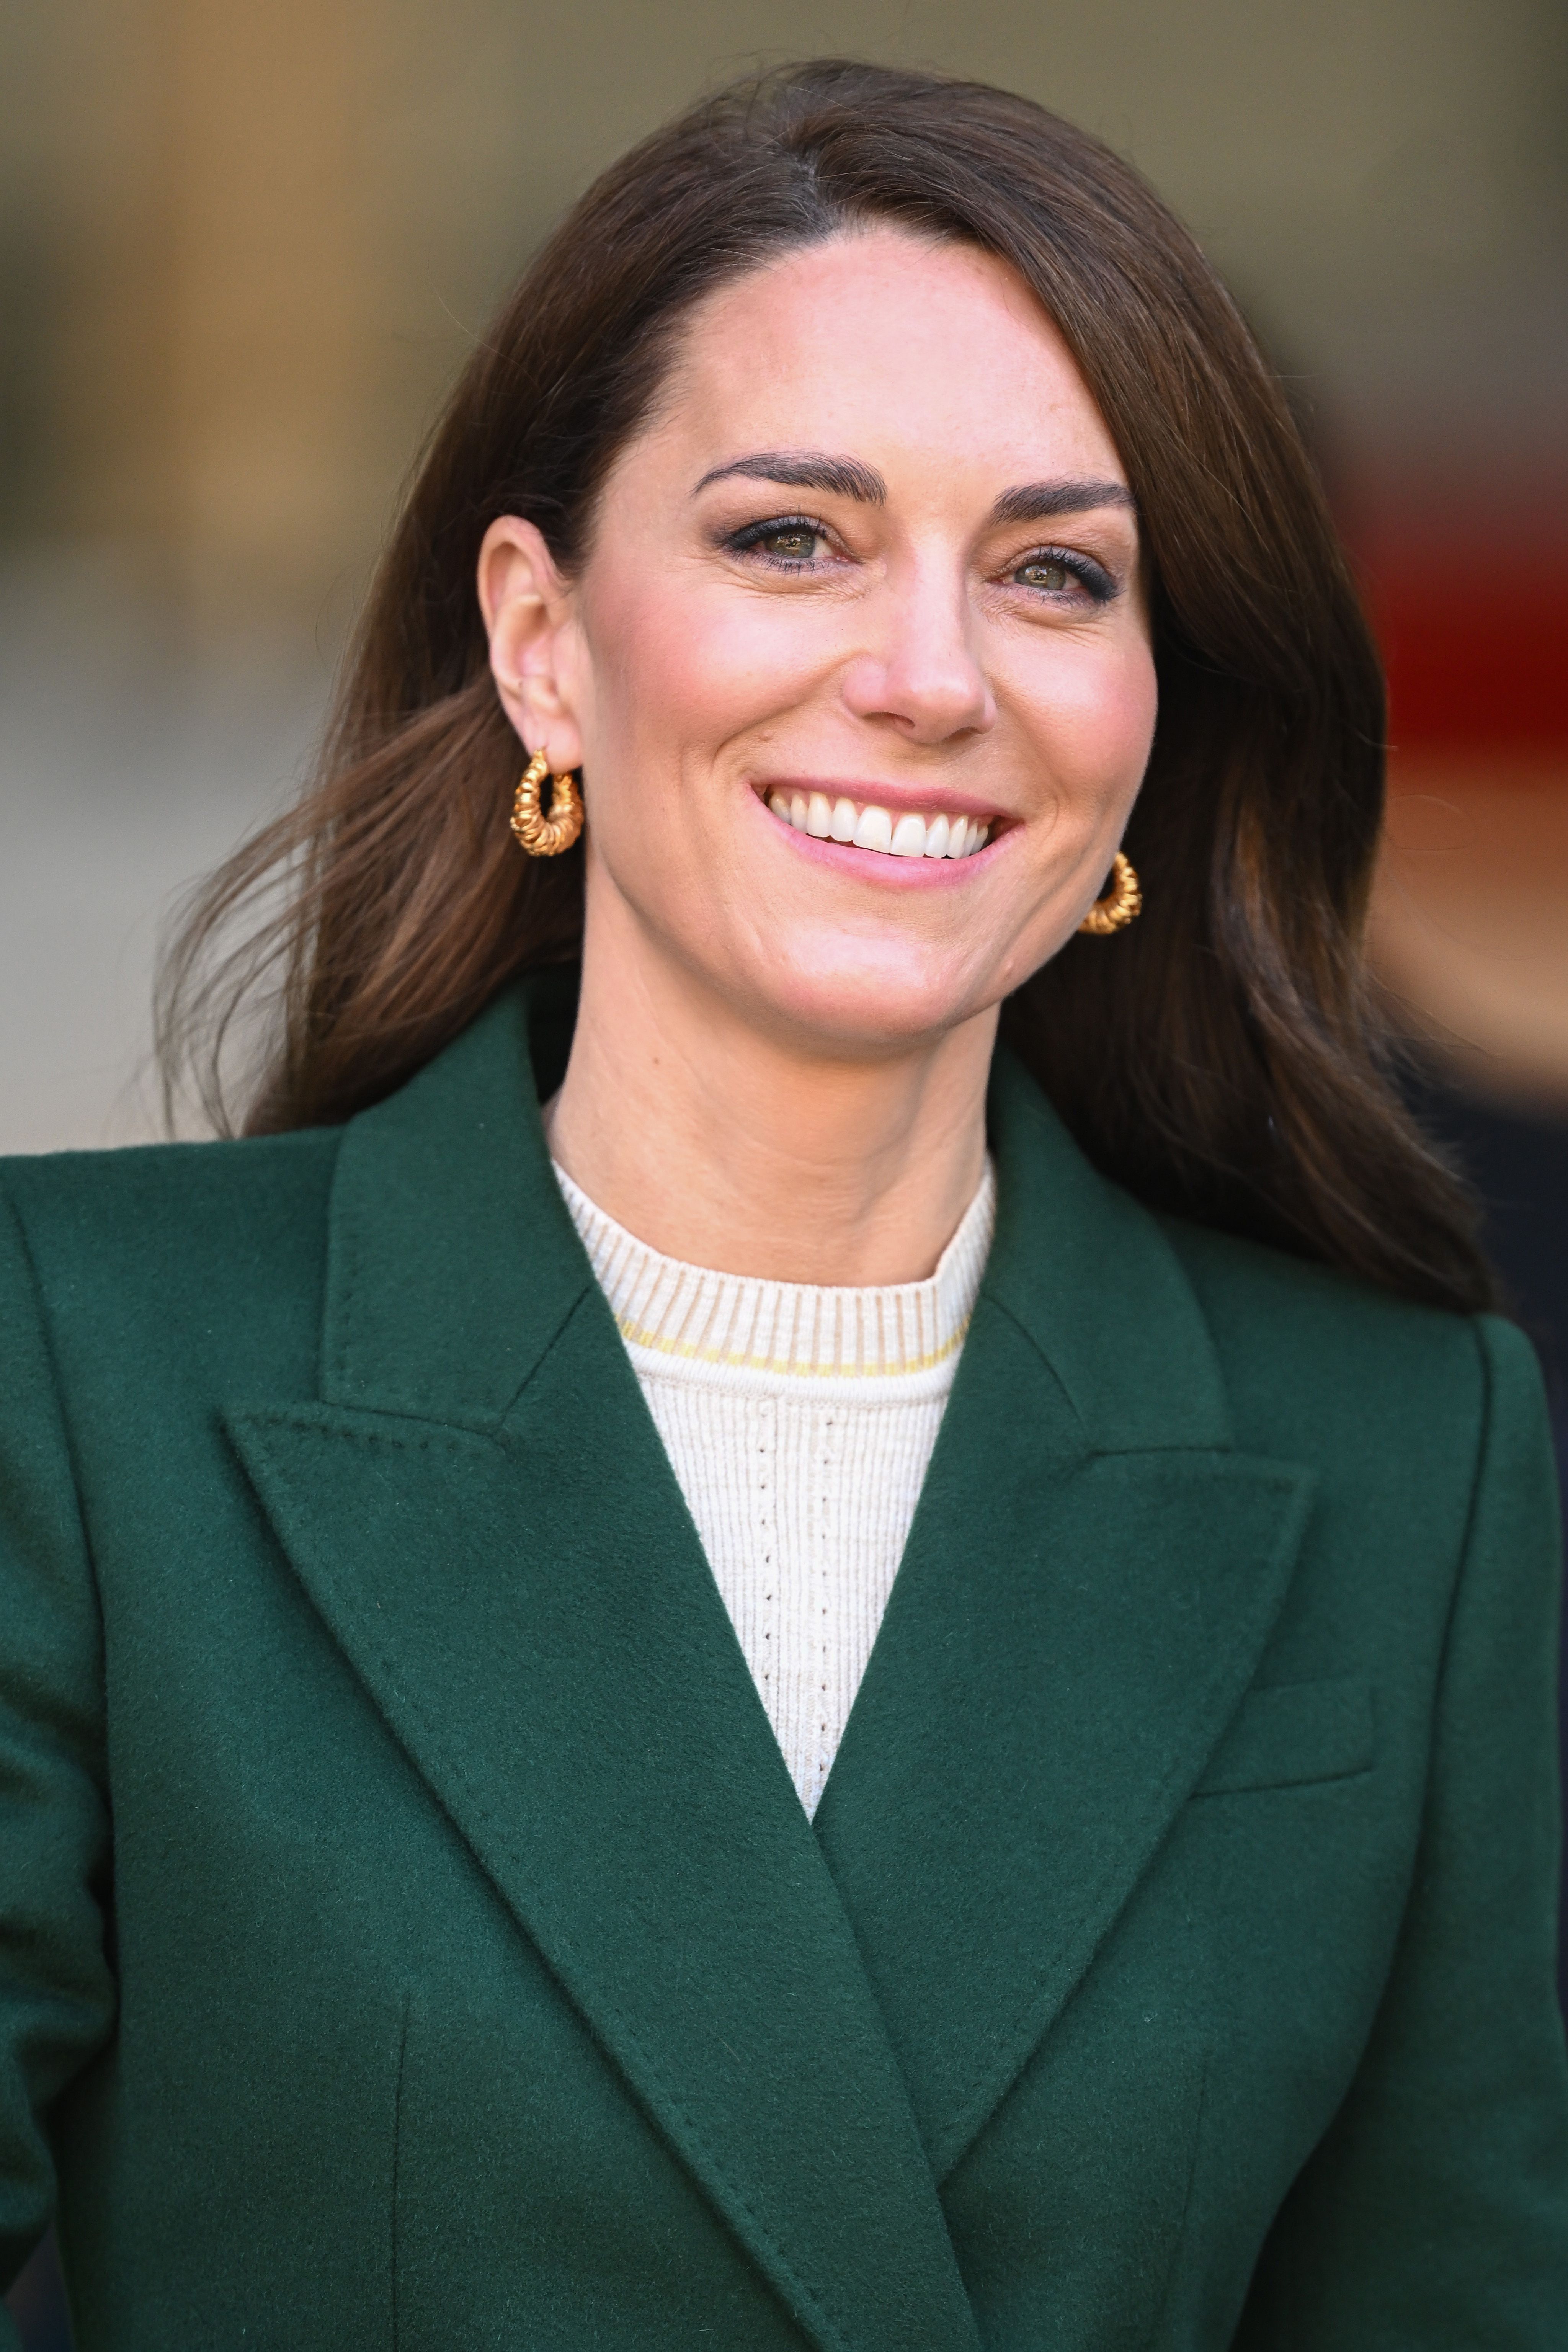 Kate Middleton Launches New Instagram Account Dedicated To Early Childhood